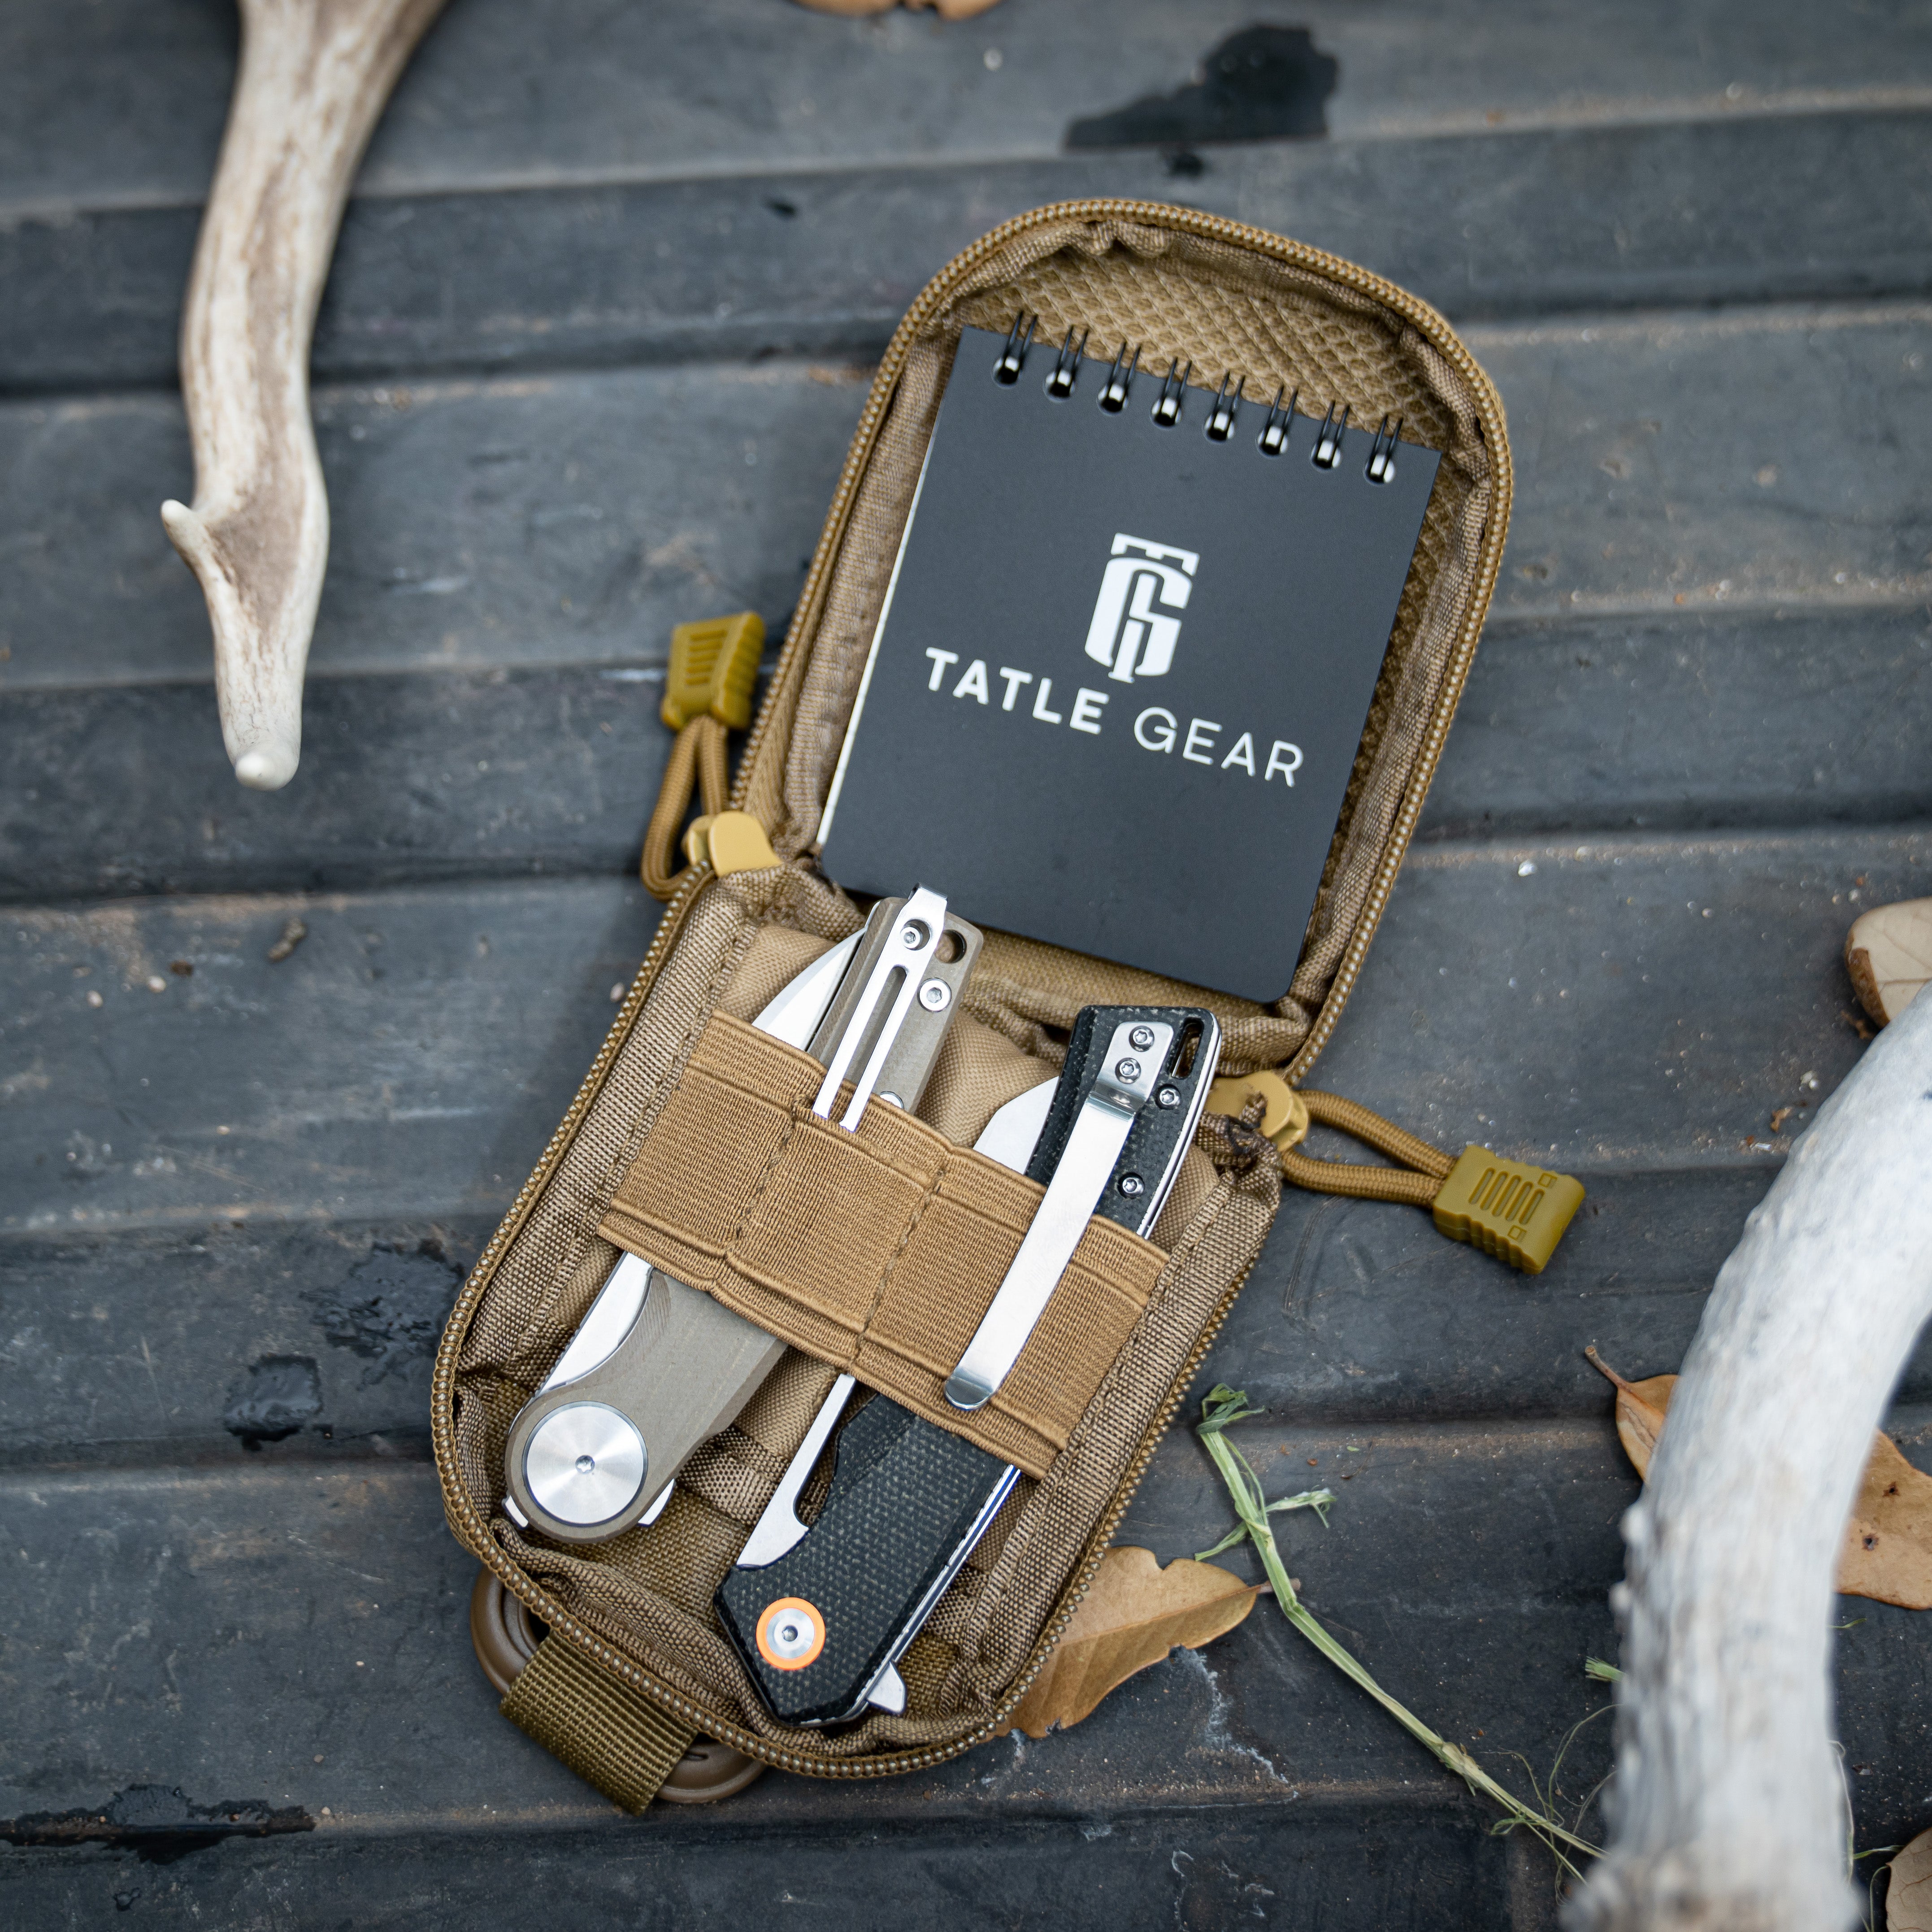 The Tatle Gear Pocket Organizer With Knives In It